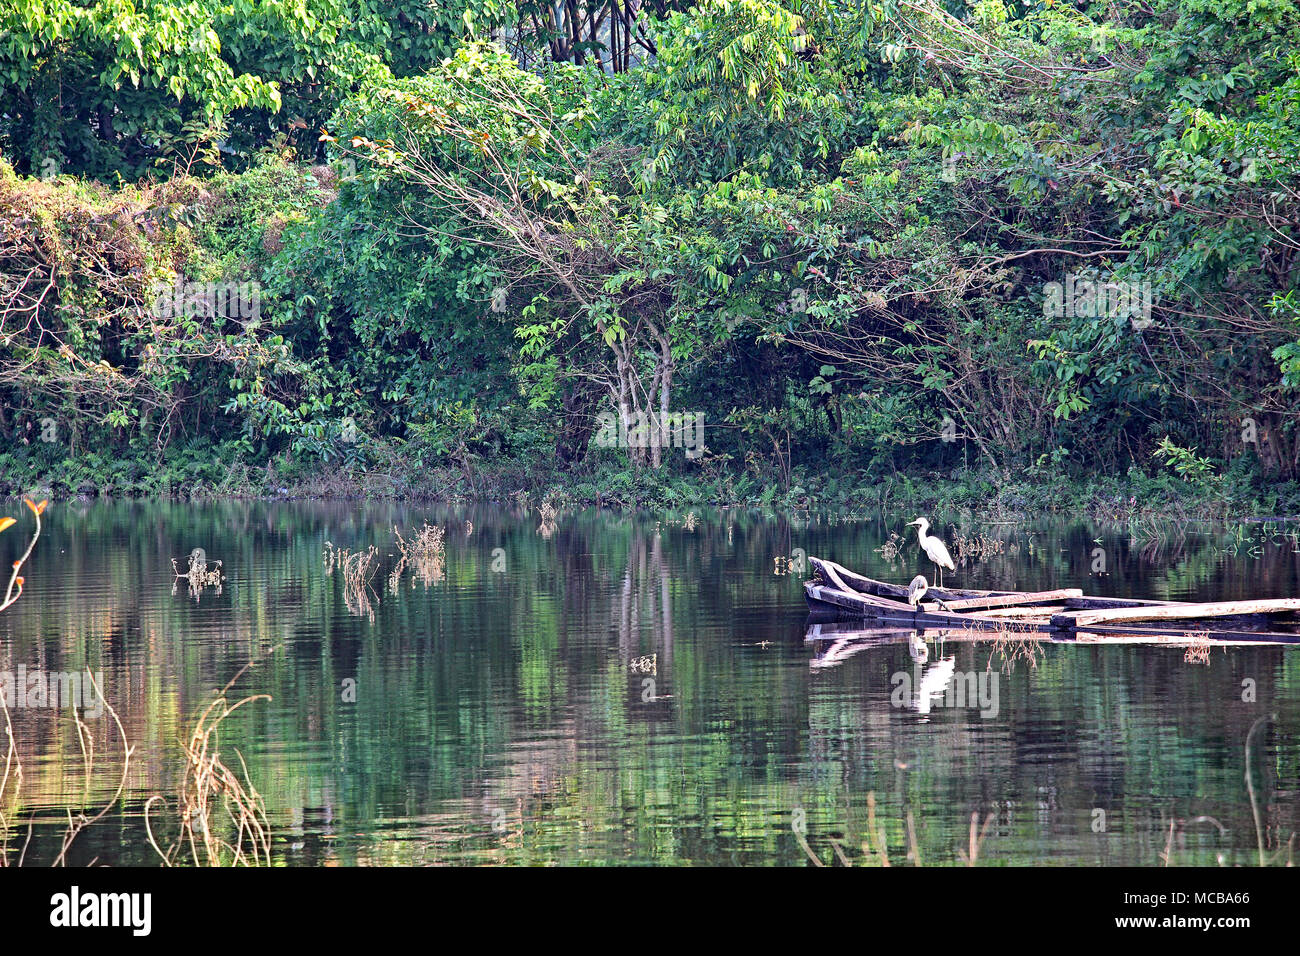 White egrets standing on submerged wooden boat and looking for fish in a lake in Kerala, India. Stock Photo